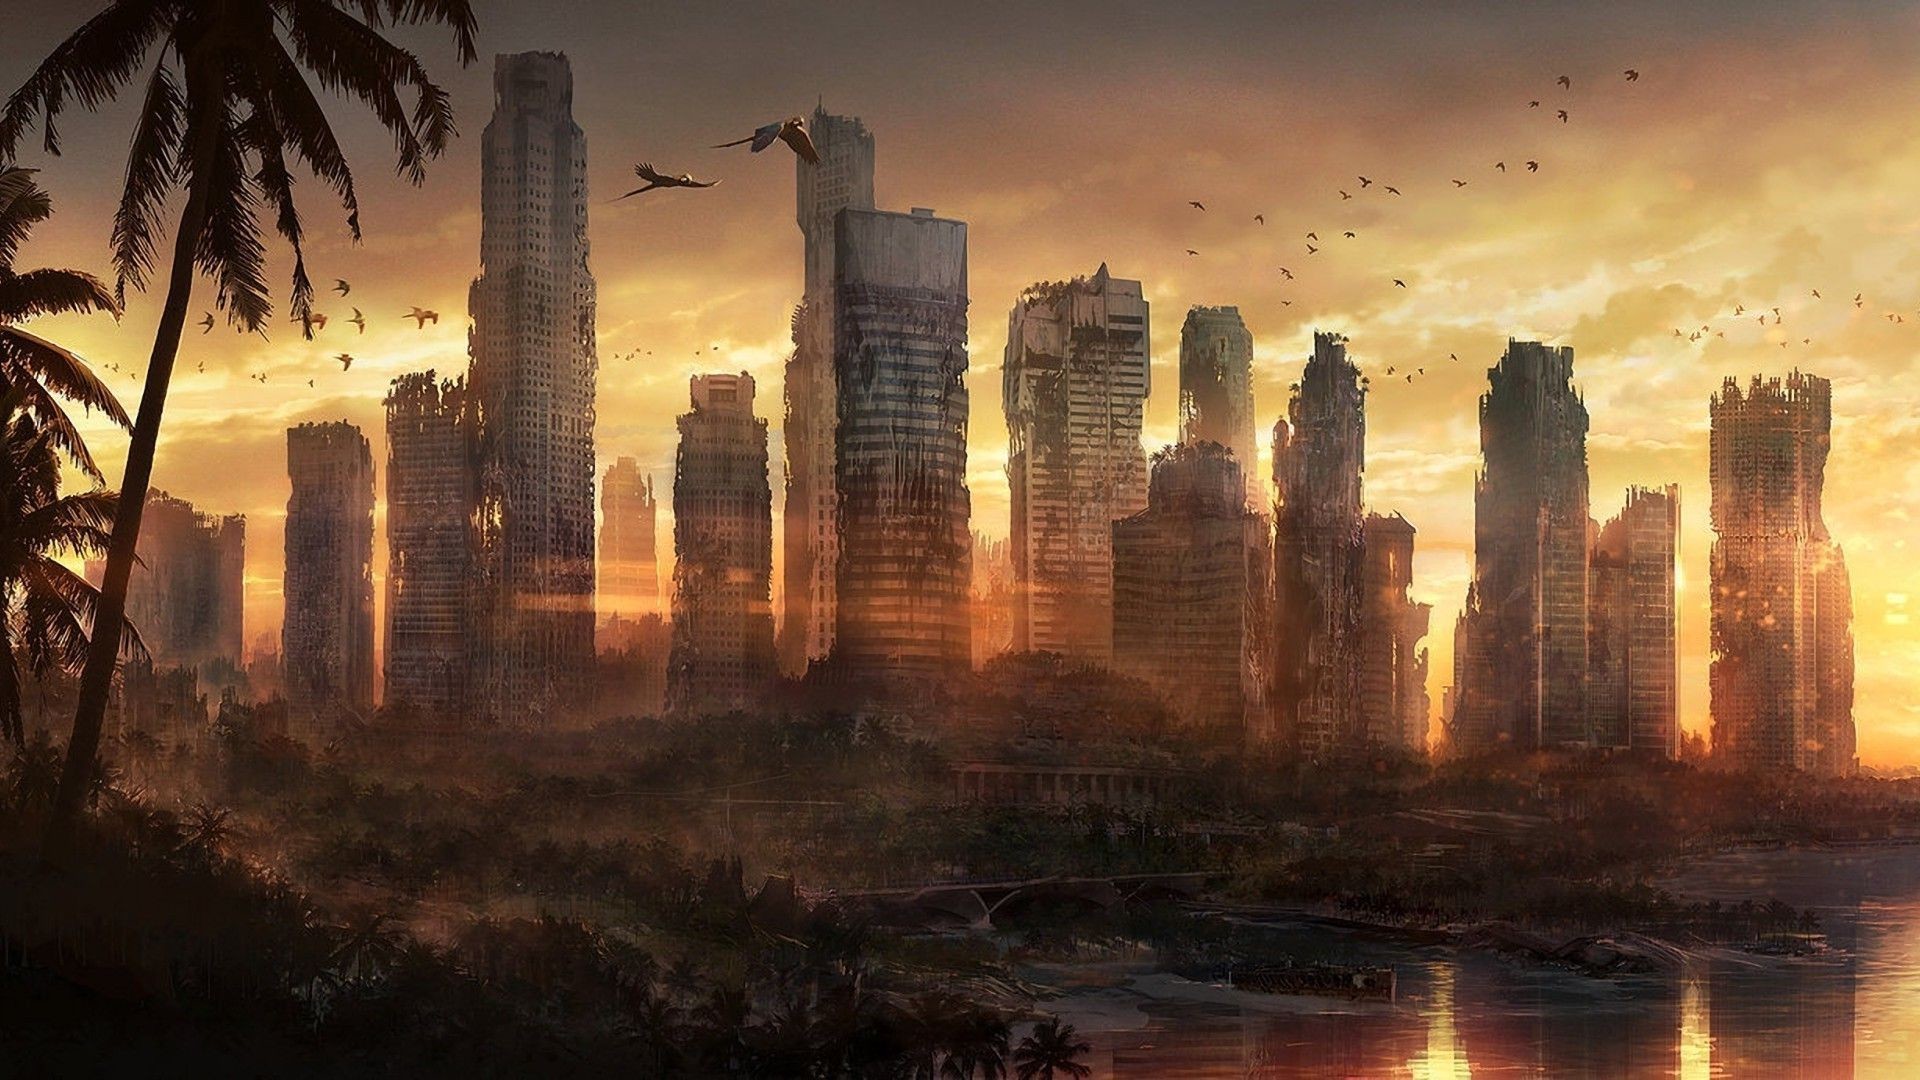 1920x1080 Post Apocalyptic Wallpaper | Photo Wallpapers - Wallpaper Zone